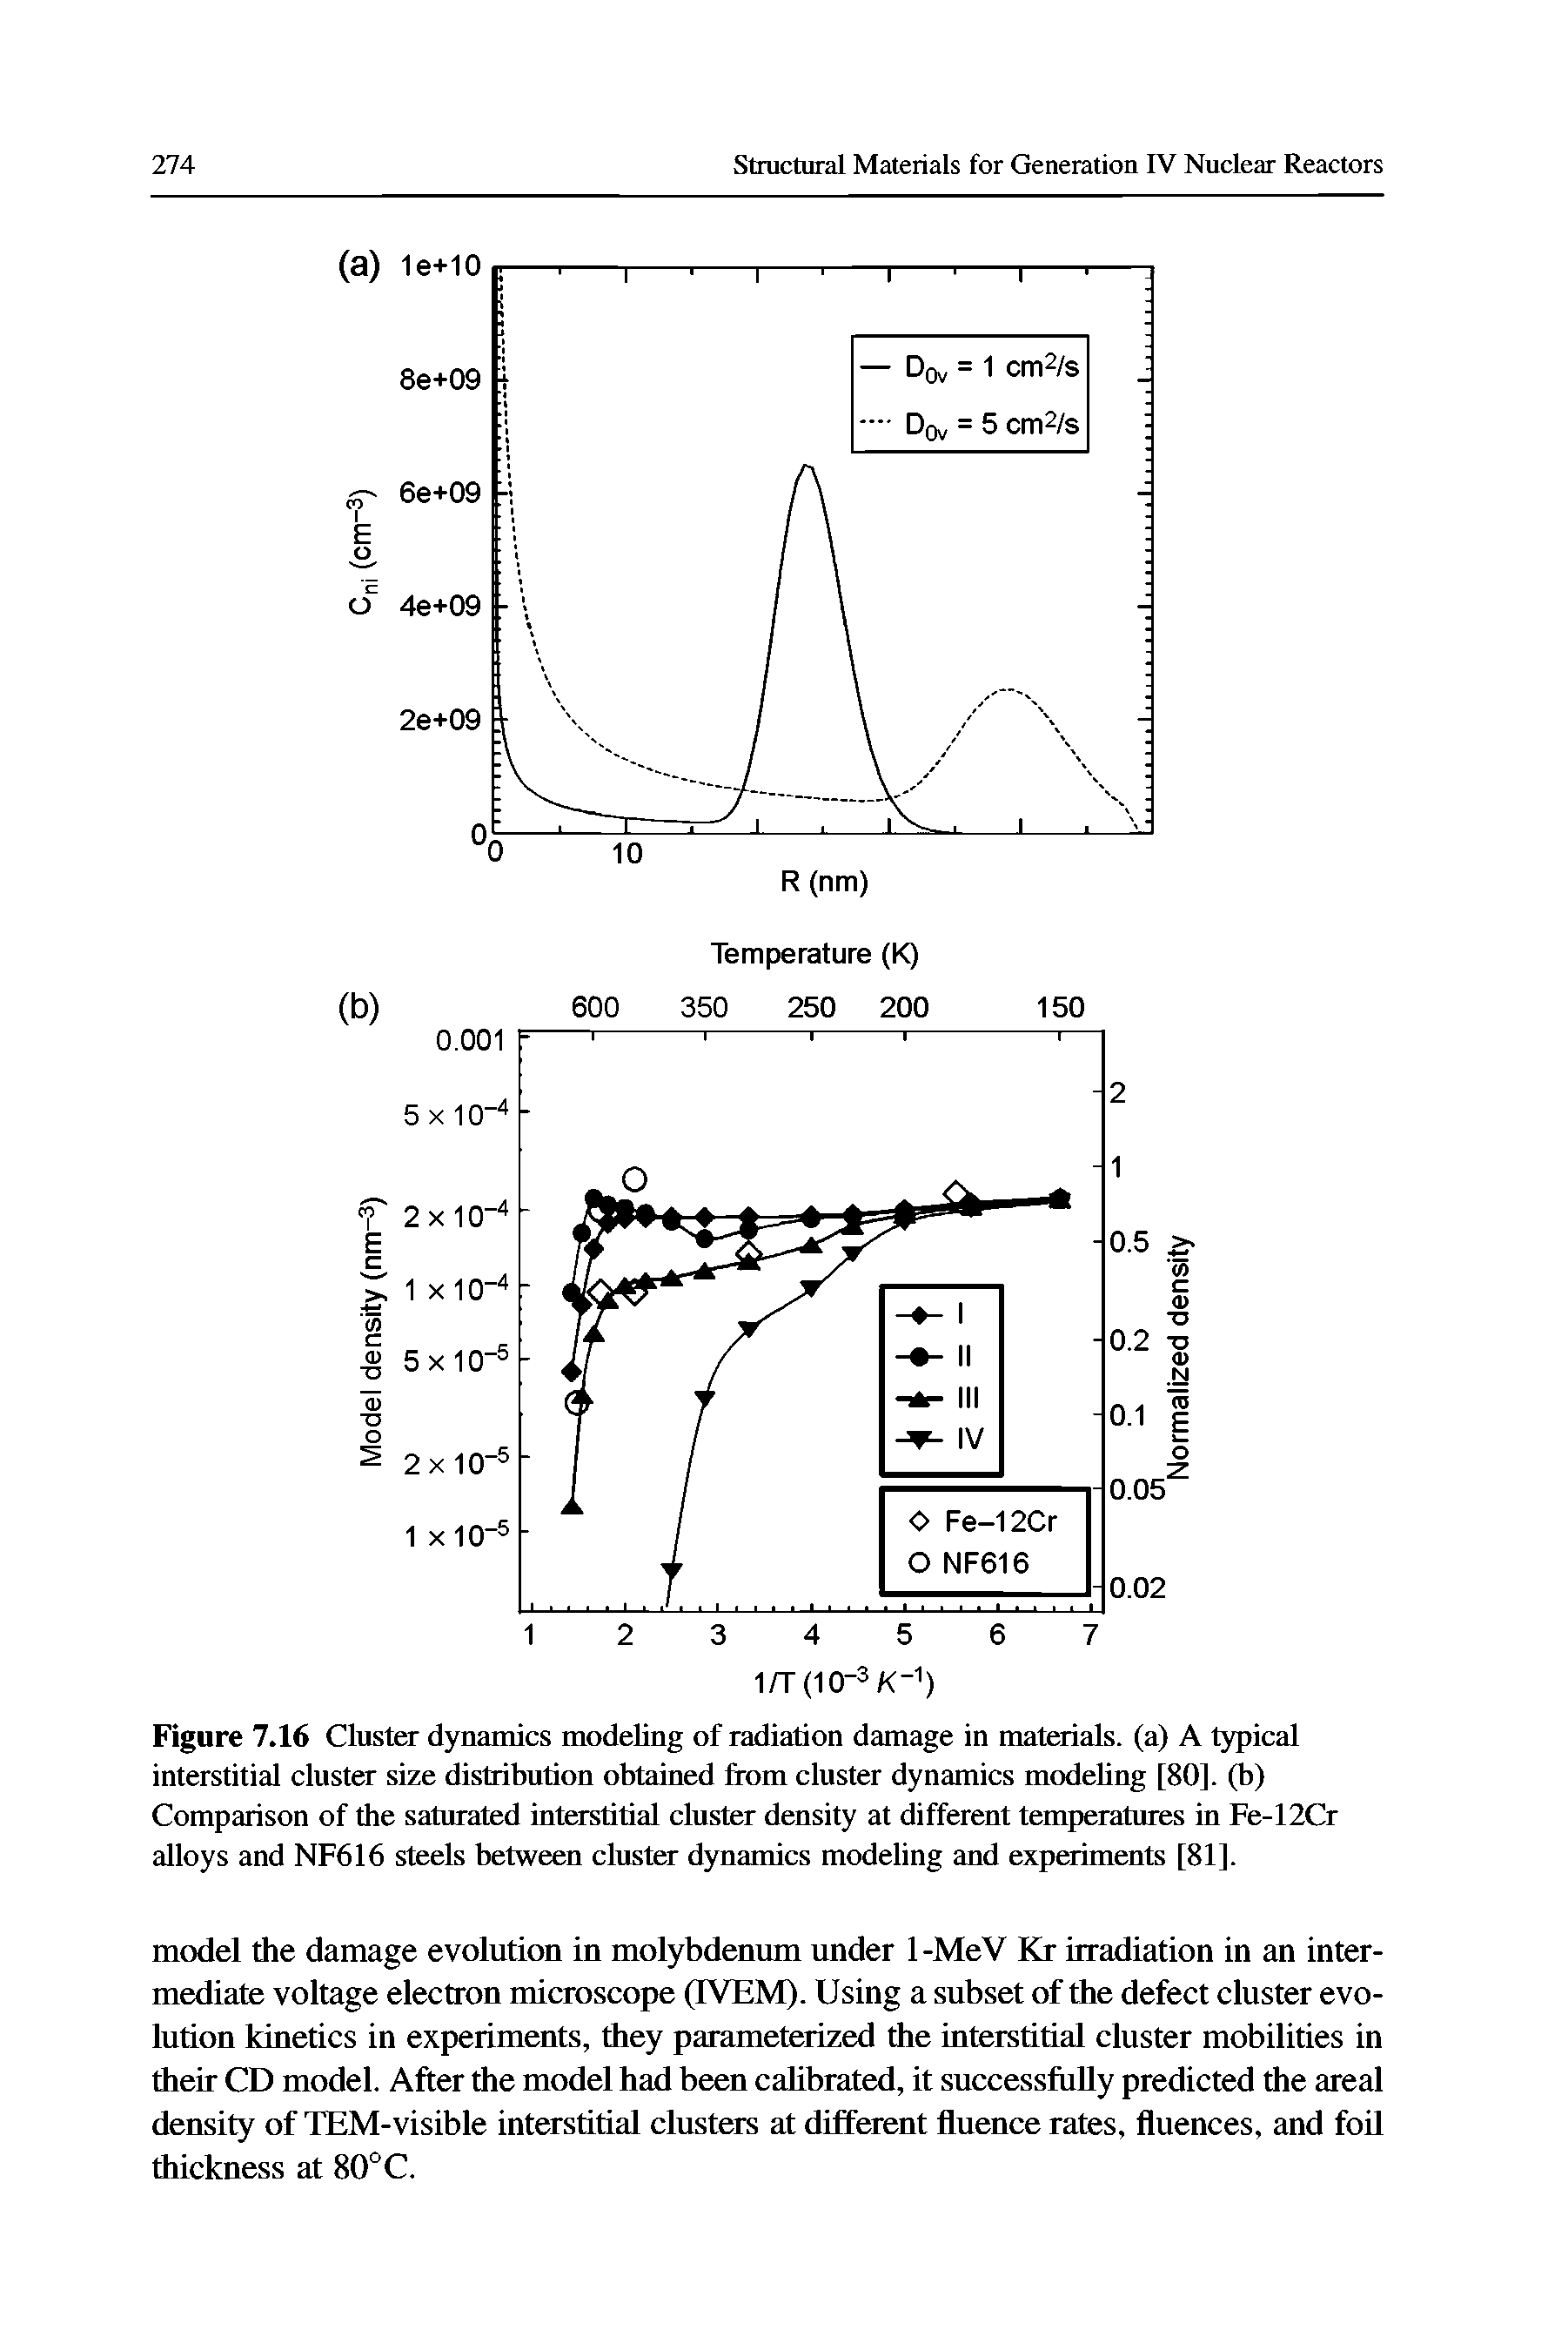 Figure 7.16 Cluster dynamics modeling of radiation damage in materials, (a) A typical interstitial cluster size distribution obtained from cluster dynamics modeUng [80]. (b) Comparison of the saturated interstitial cluster density at different temperatures in Fe-12Cr alloys and NF616 steels between cluster dynamics modeling and experiments [81].